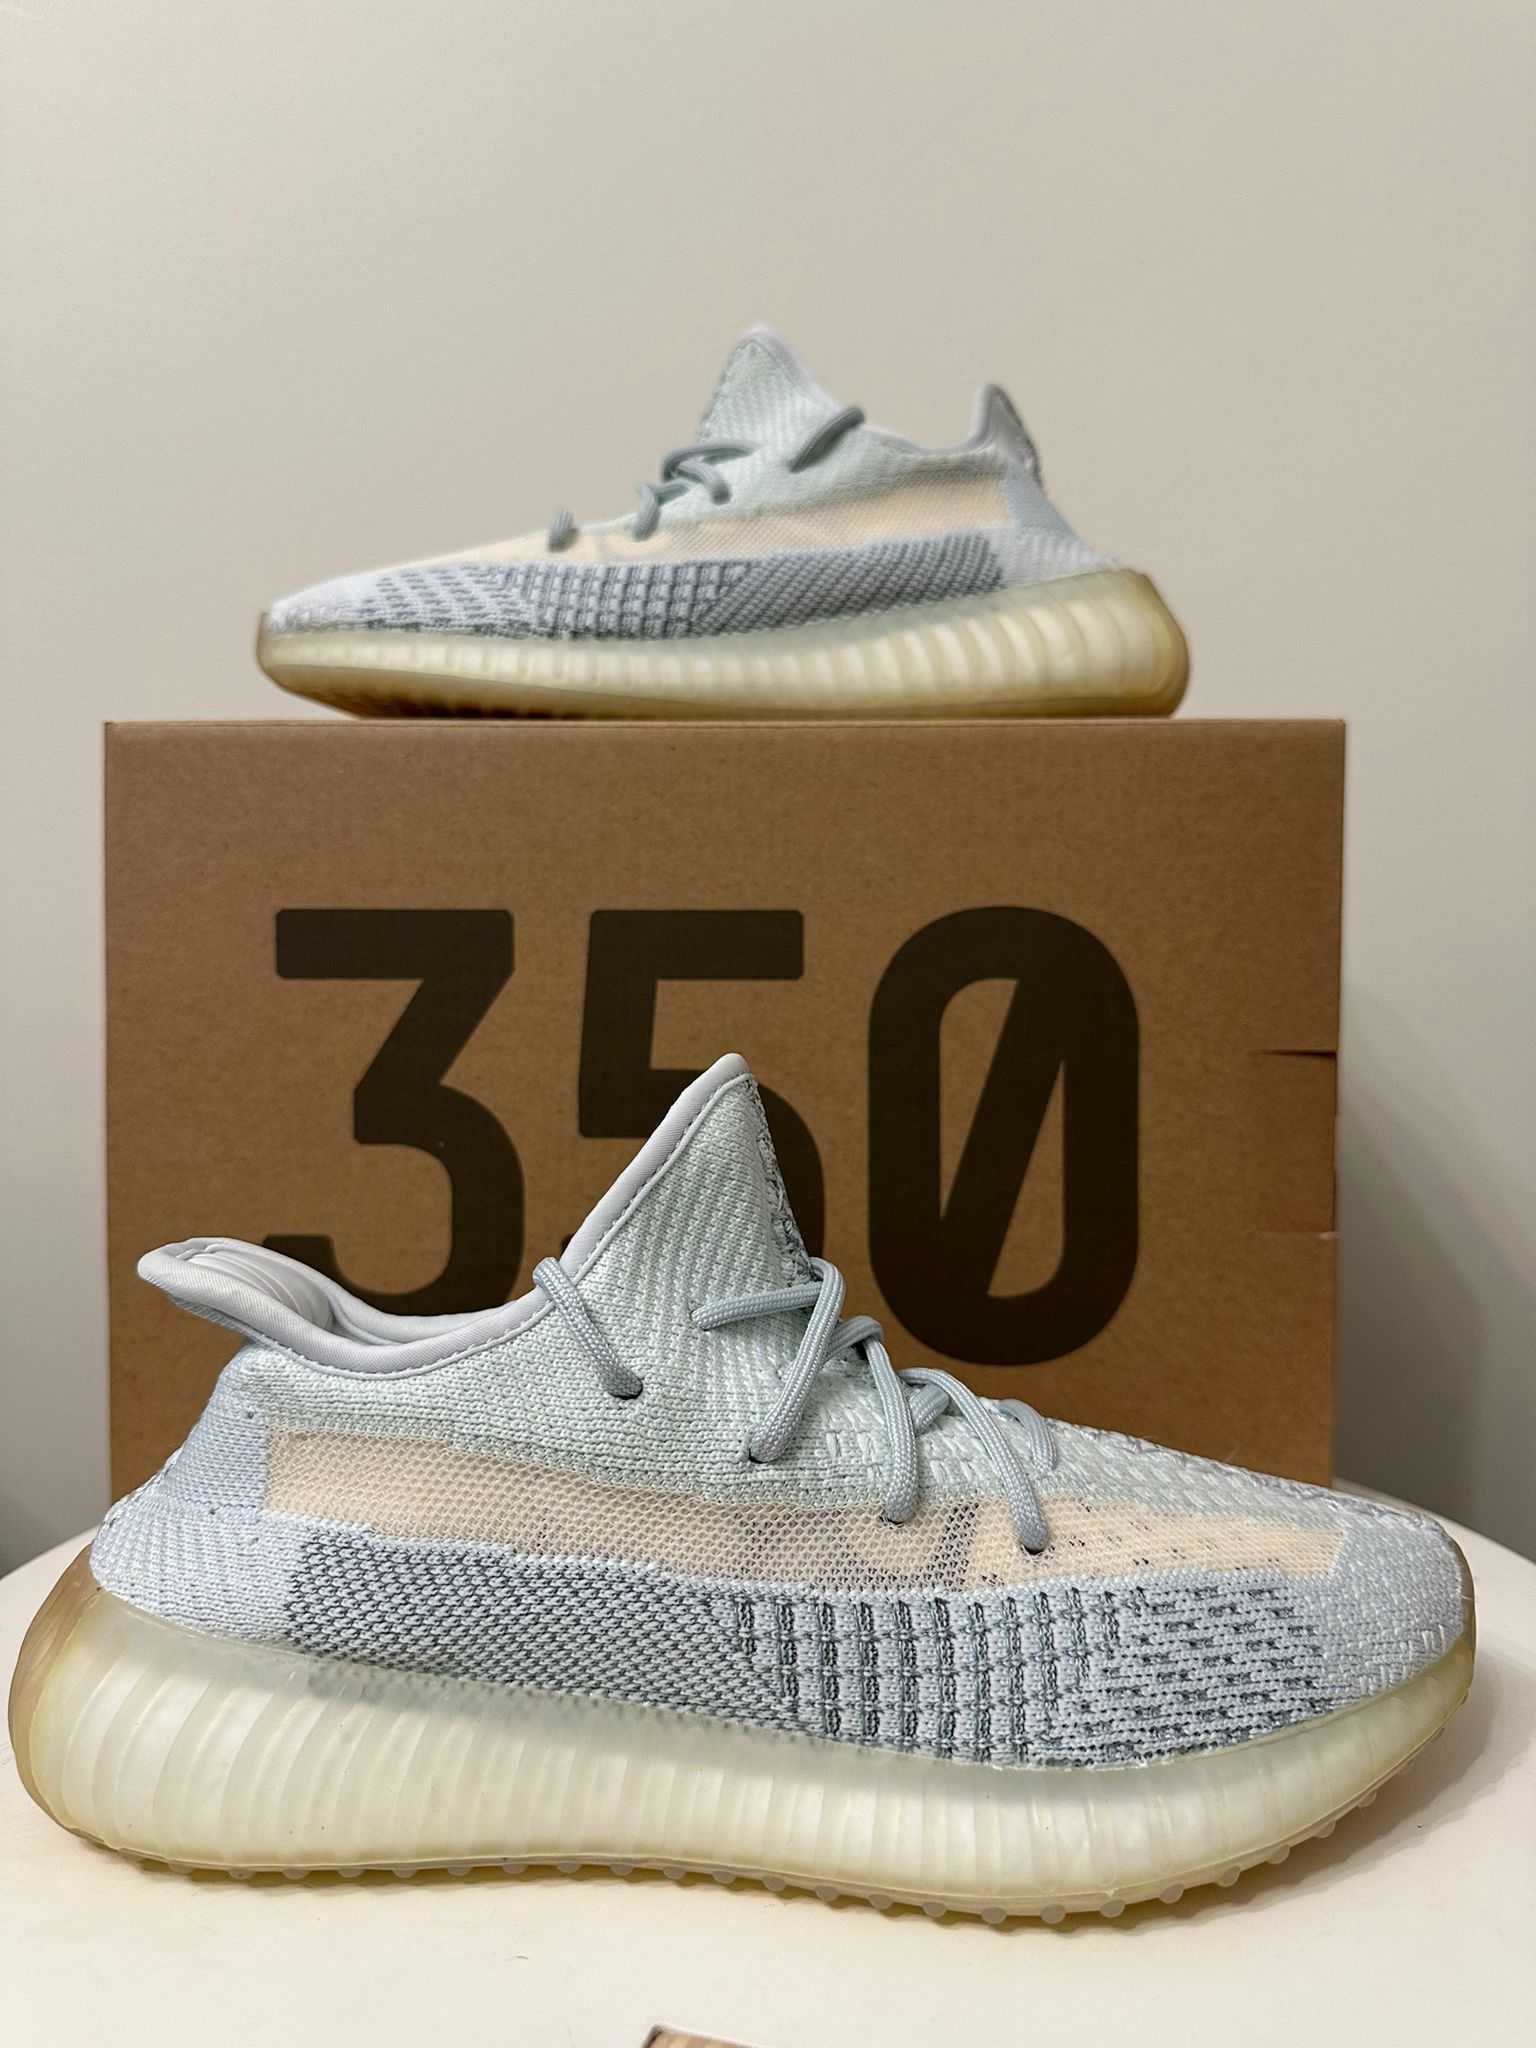 Yeezy Boost 350 V2 - Cloud White (non-reflective)